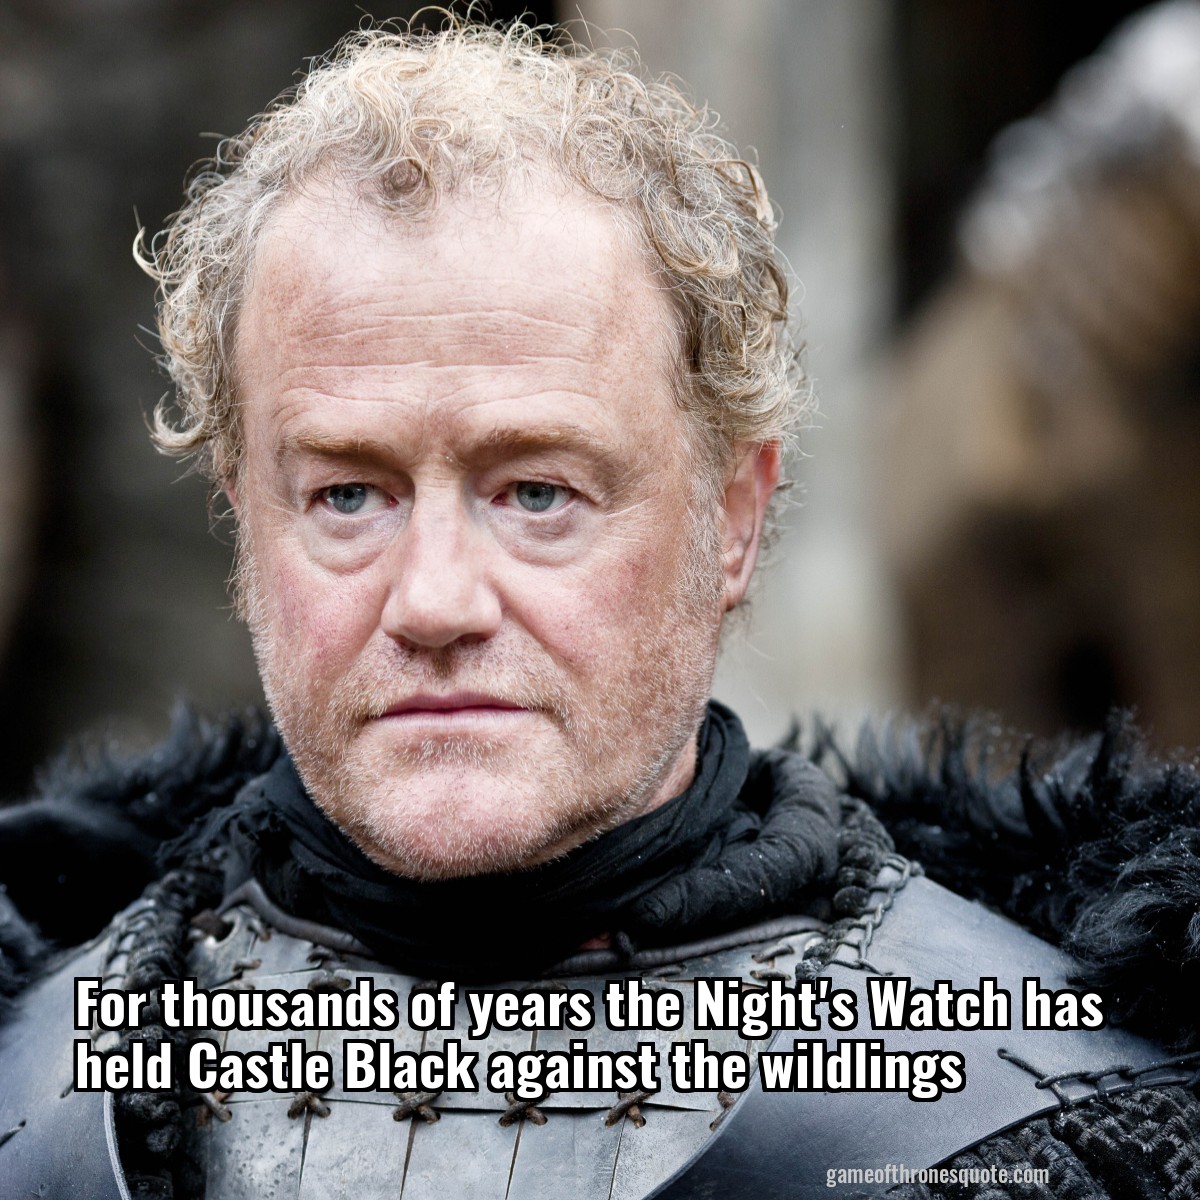 For thousands of years the Night's Watch has held Castle Black against the wildlings